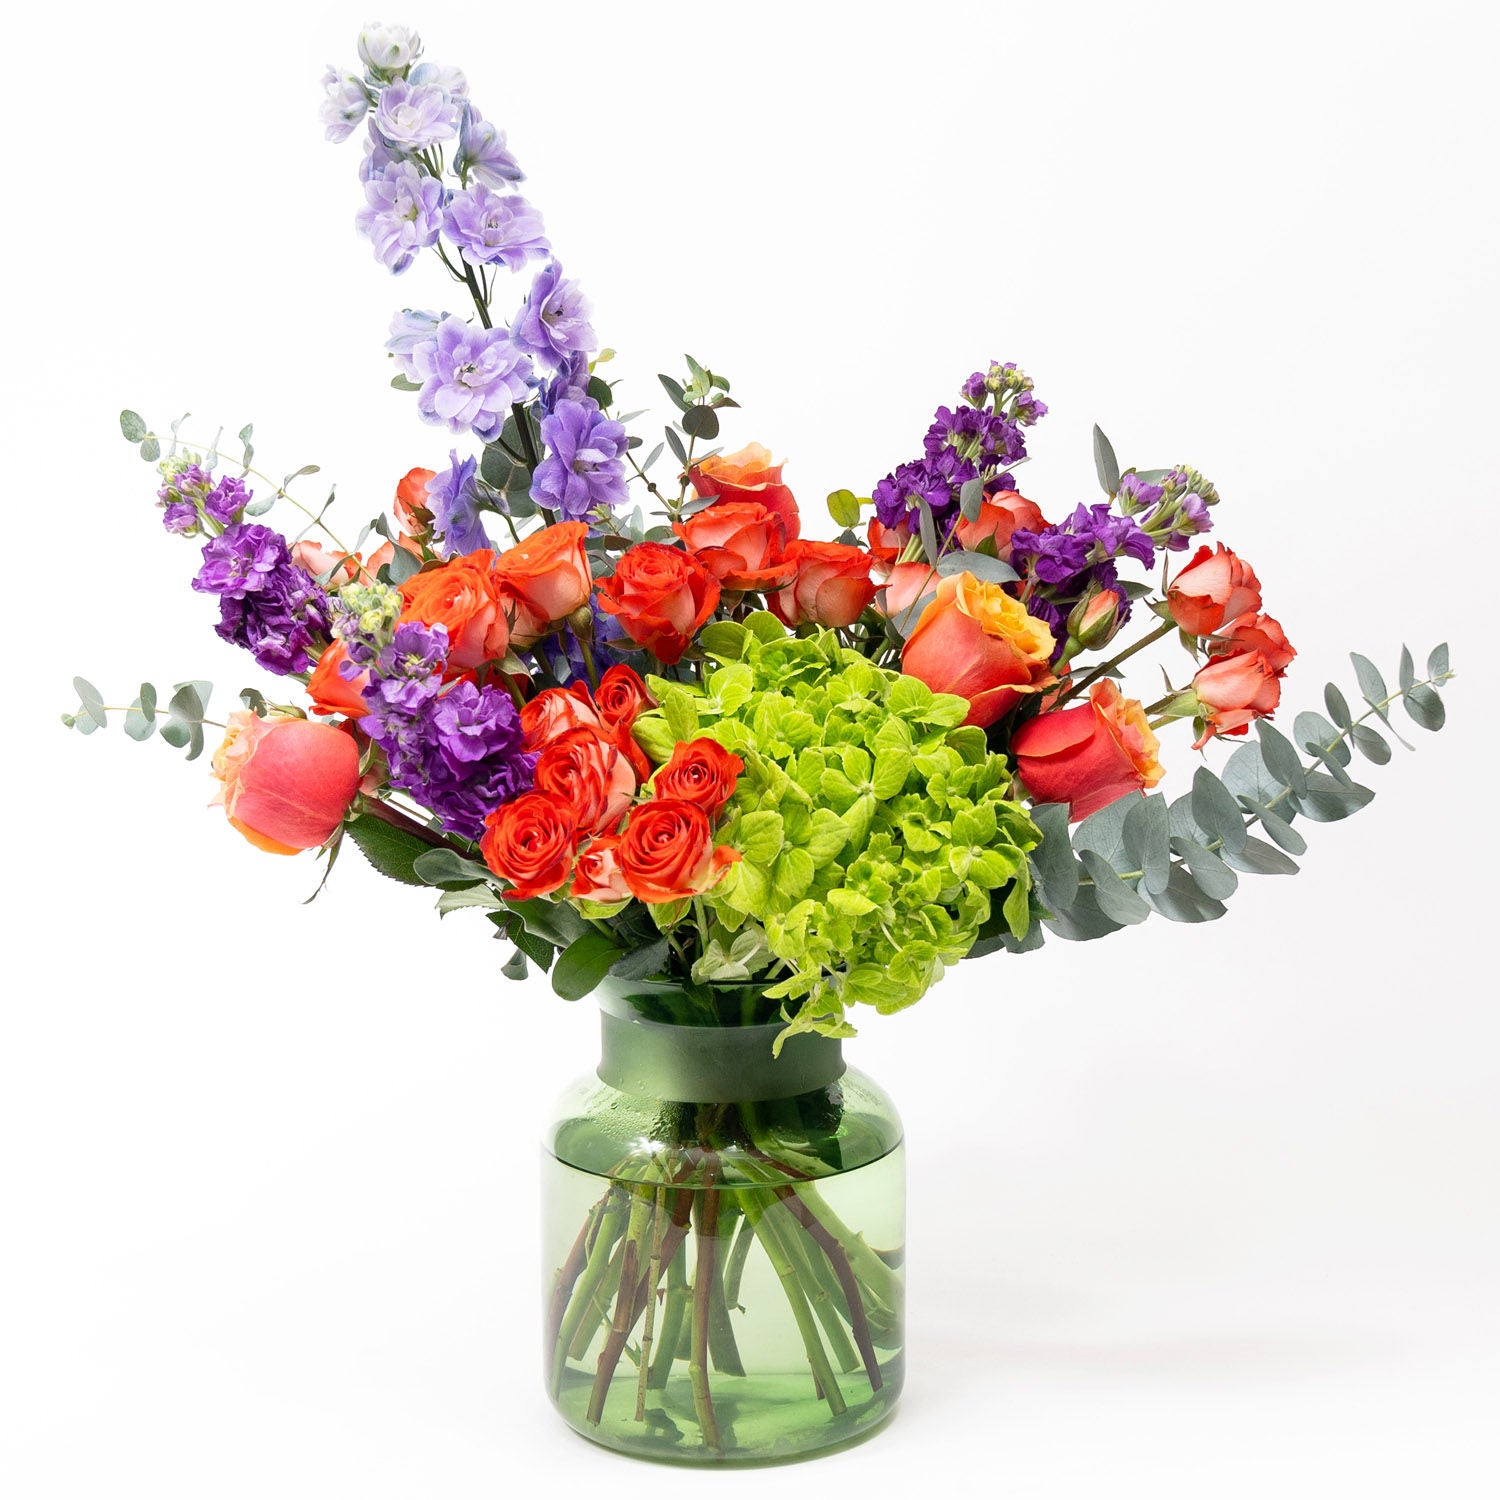 Mixed Flower Arrangement in Glass Vase with Perfume